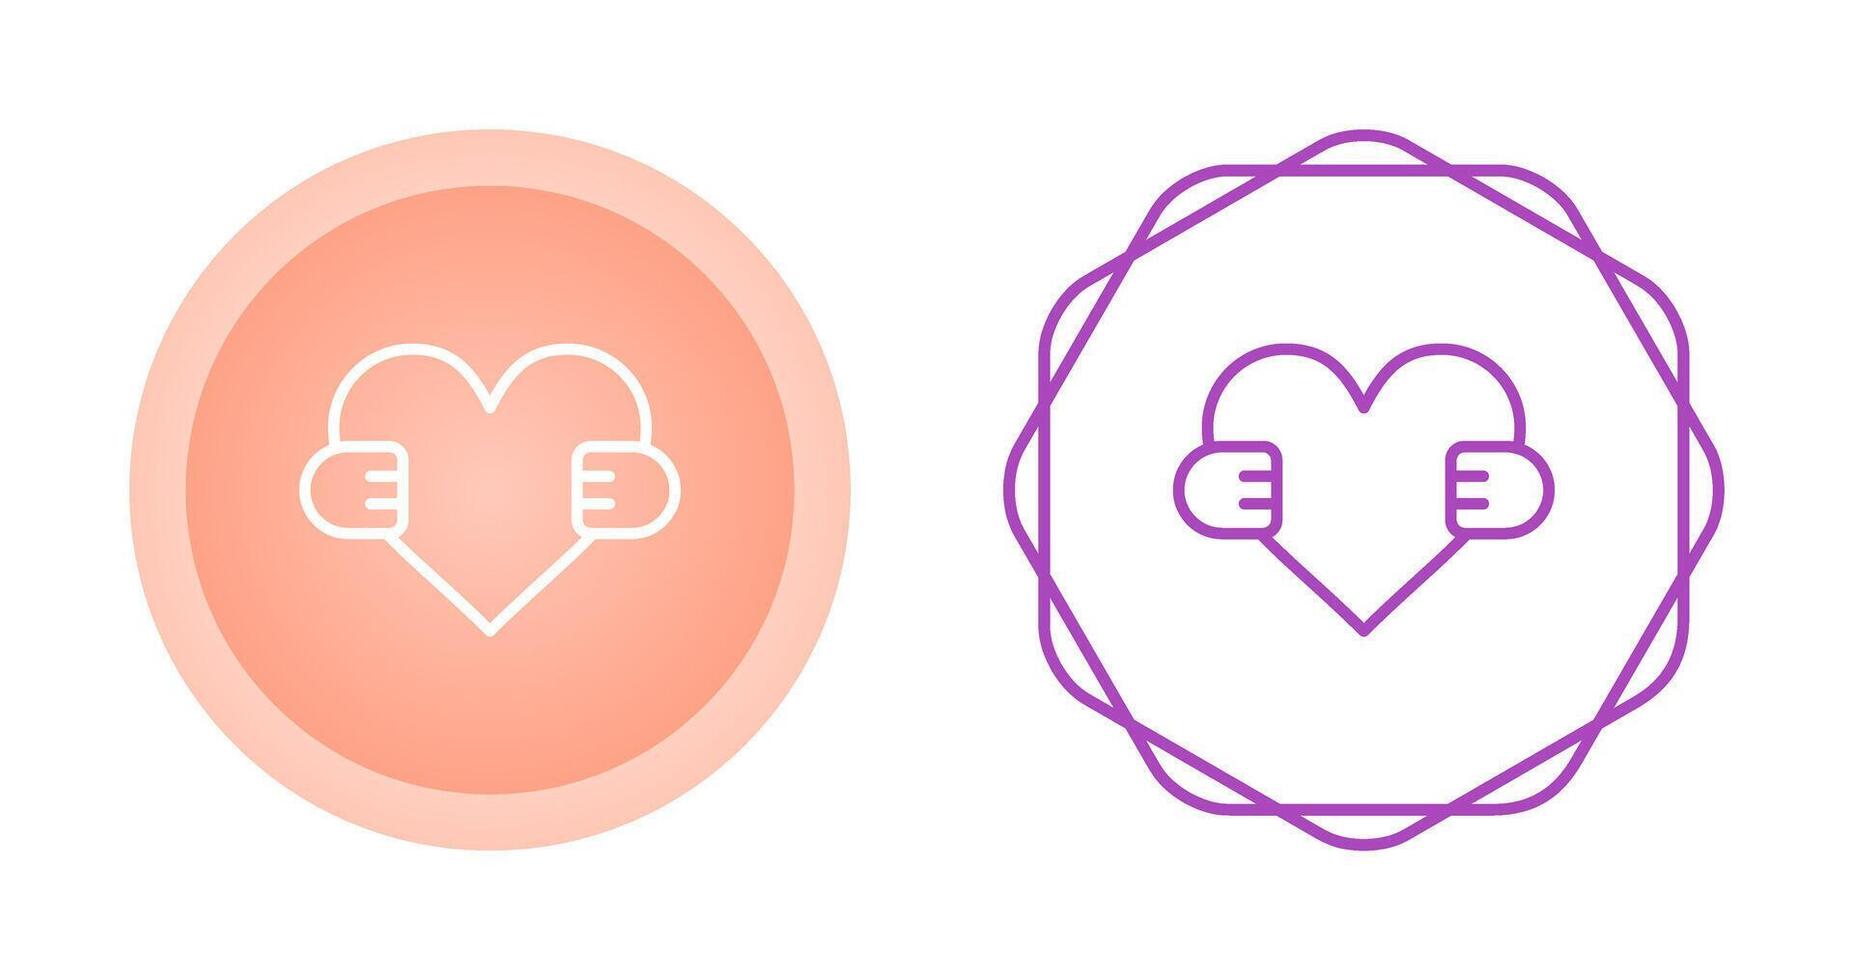 Hand Holding Heart Vector Icon